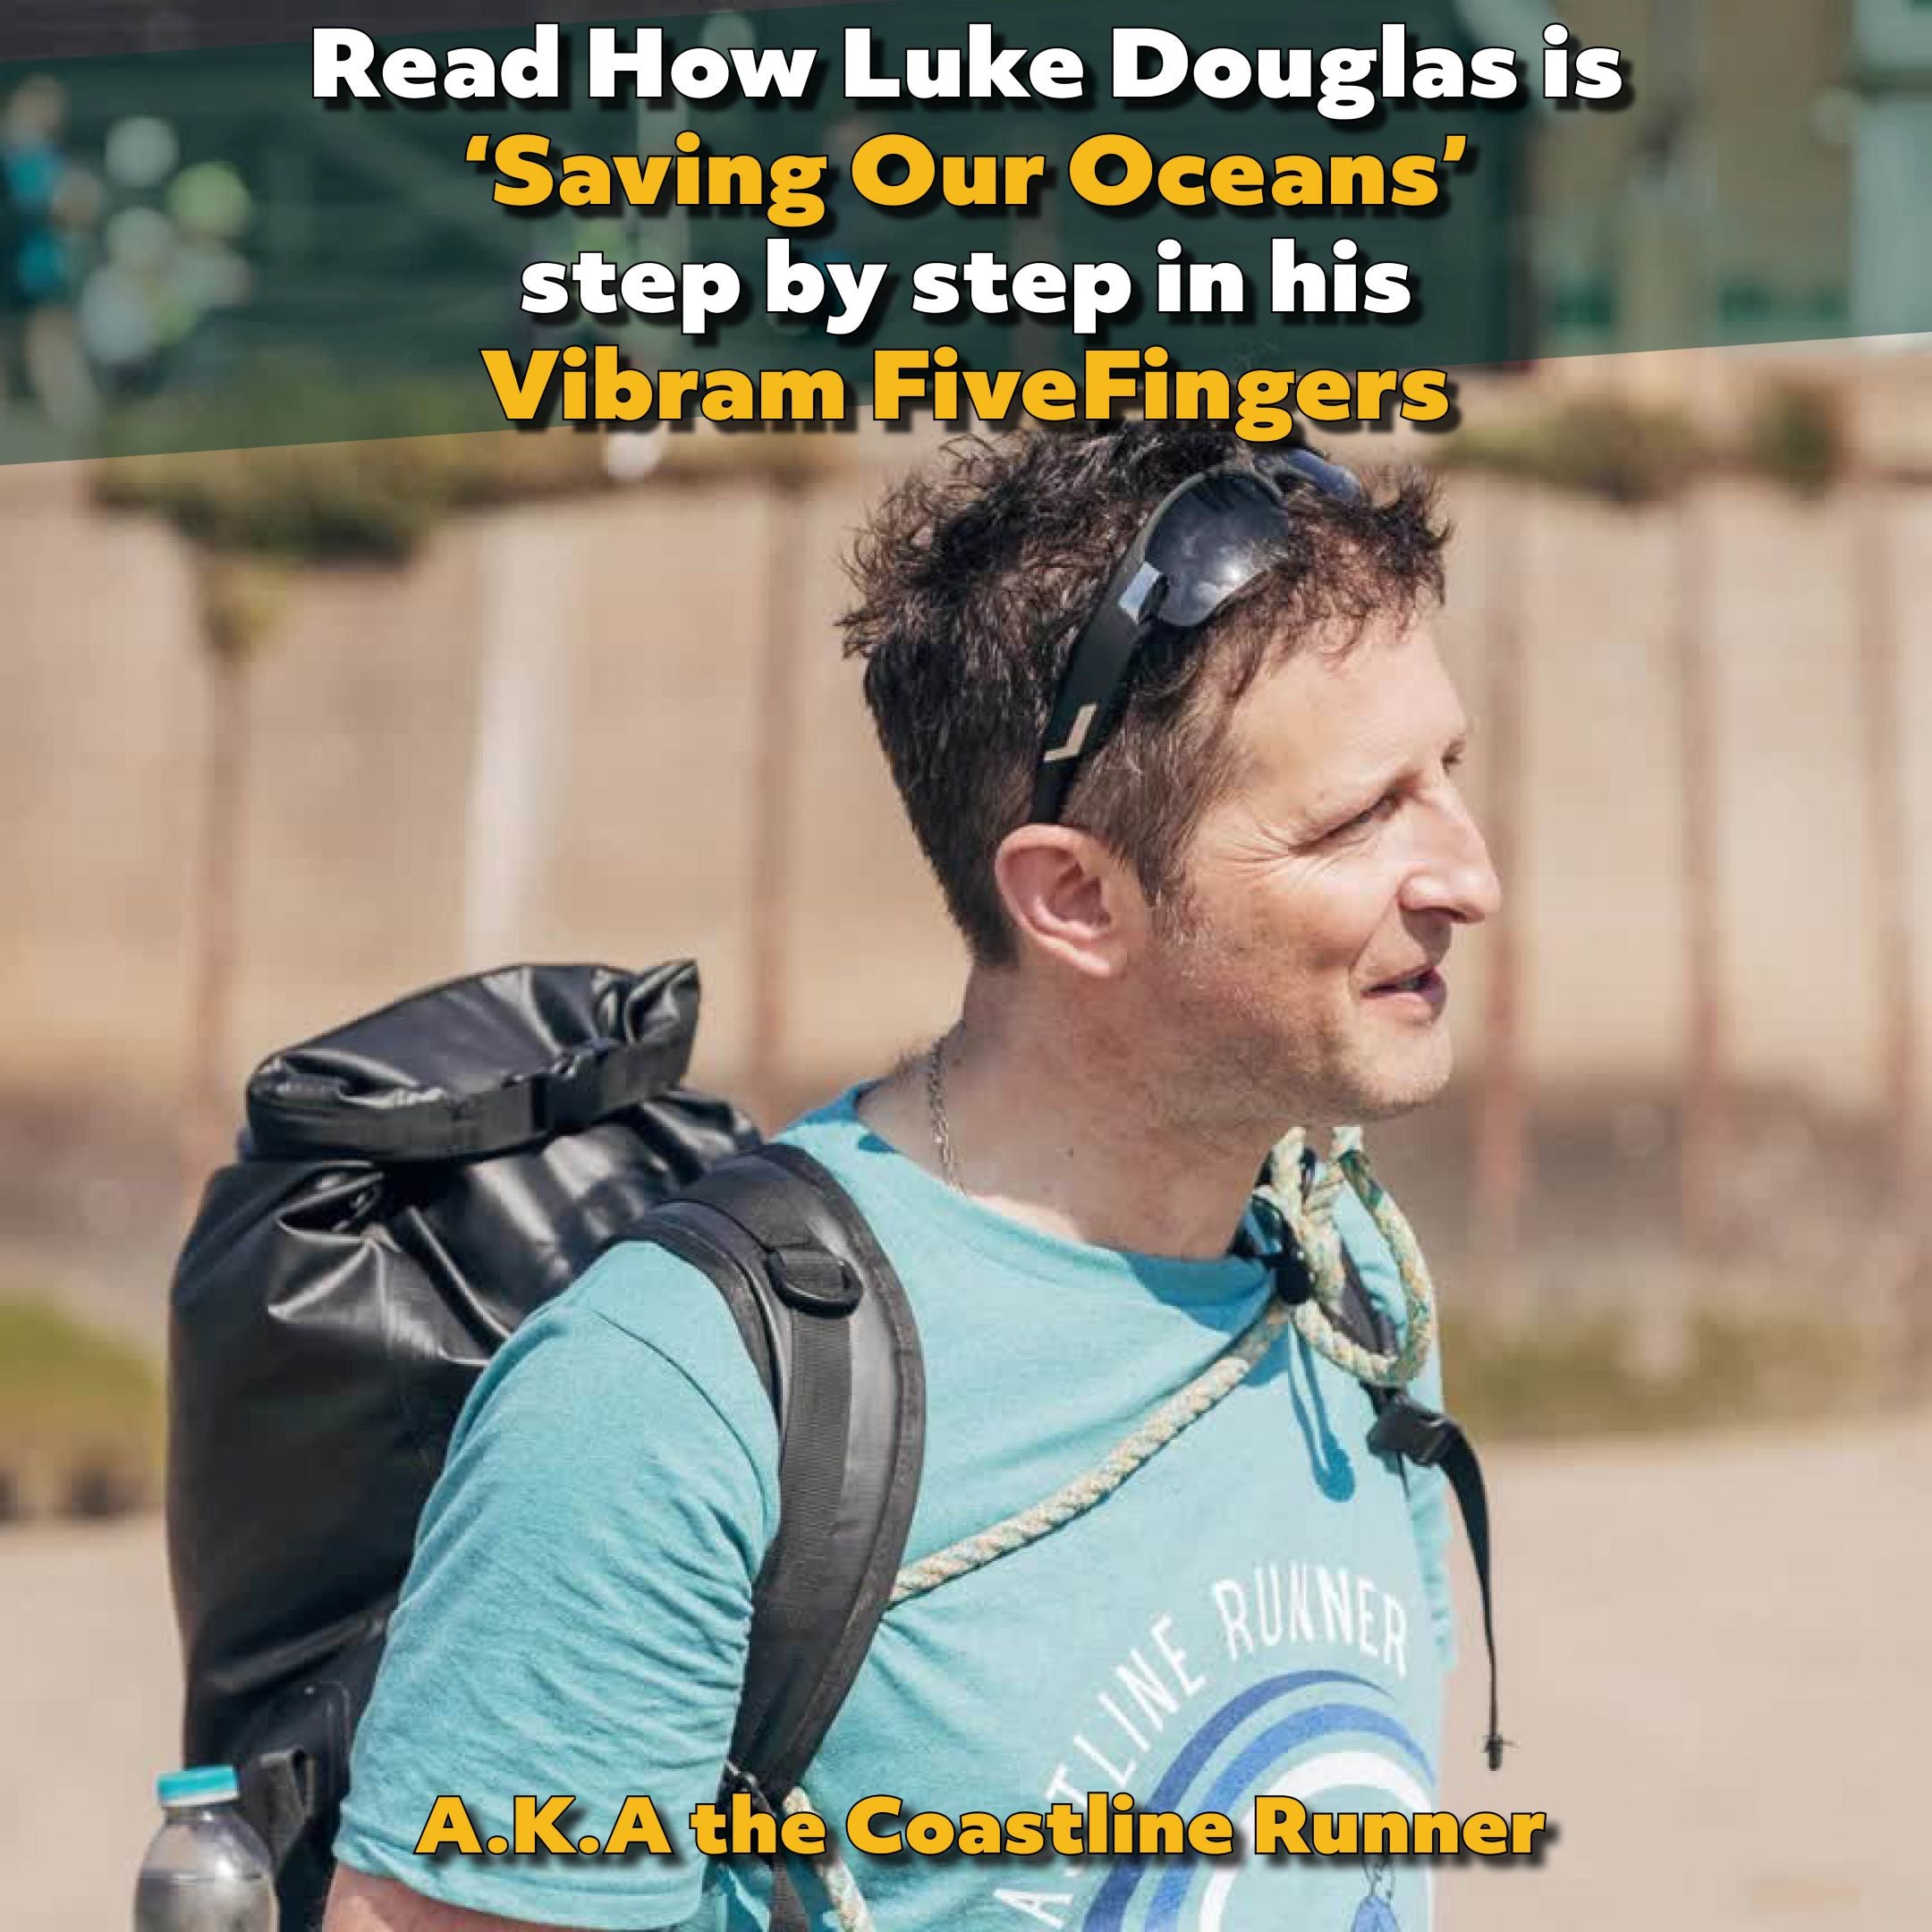 Read How Luke Douglas is 'Saving Our Oceans' Step by step in his Vibram FiveFingers